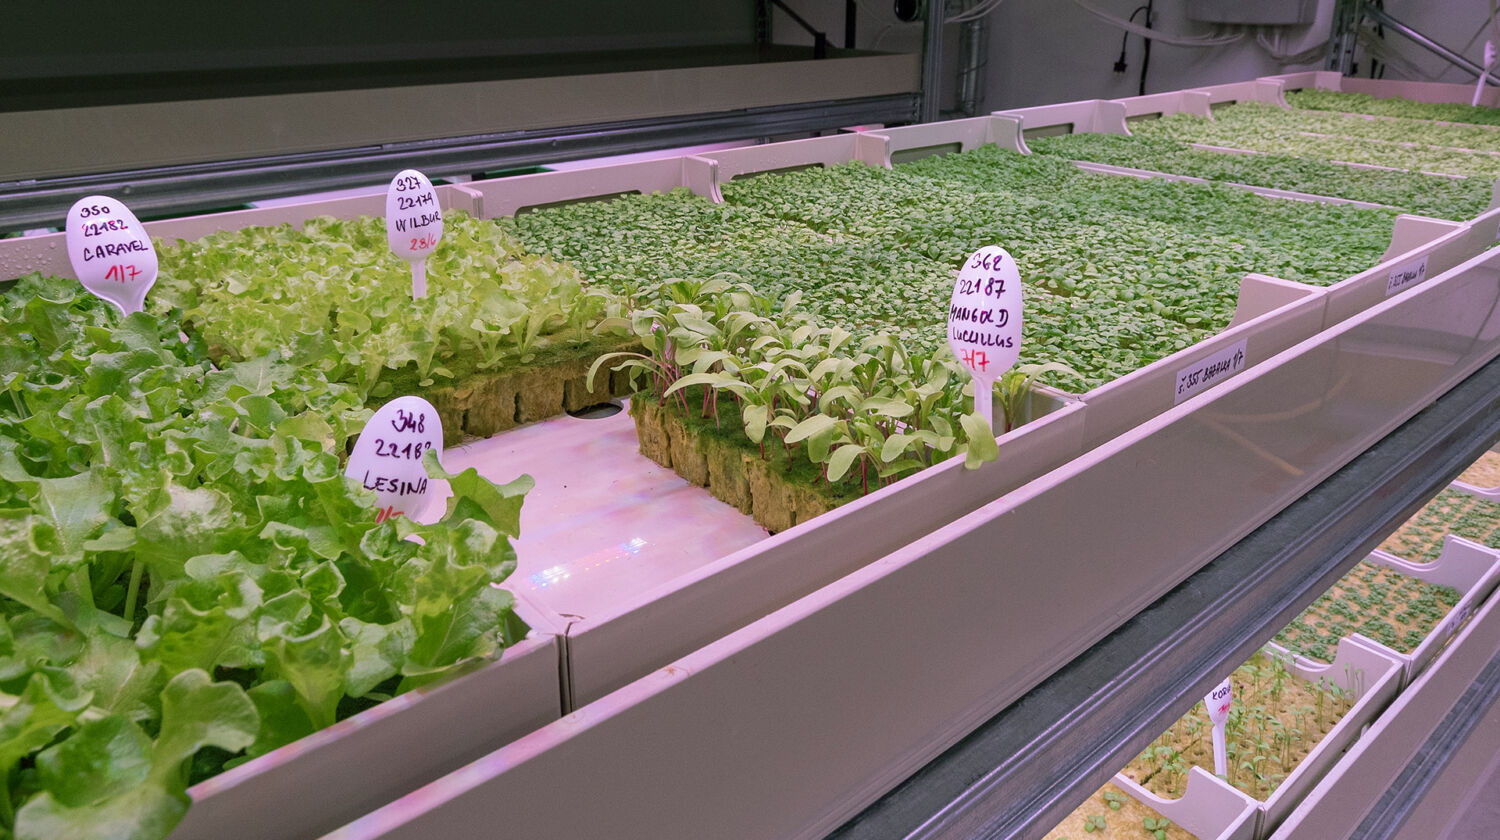 Future Farming offers its own top quality seedlings